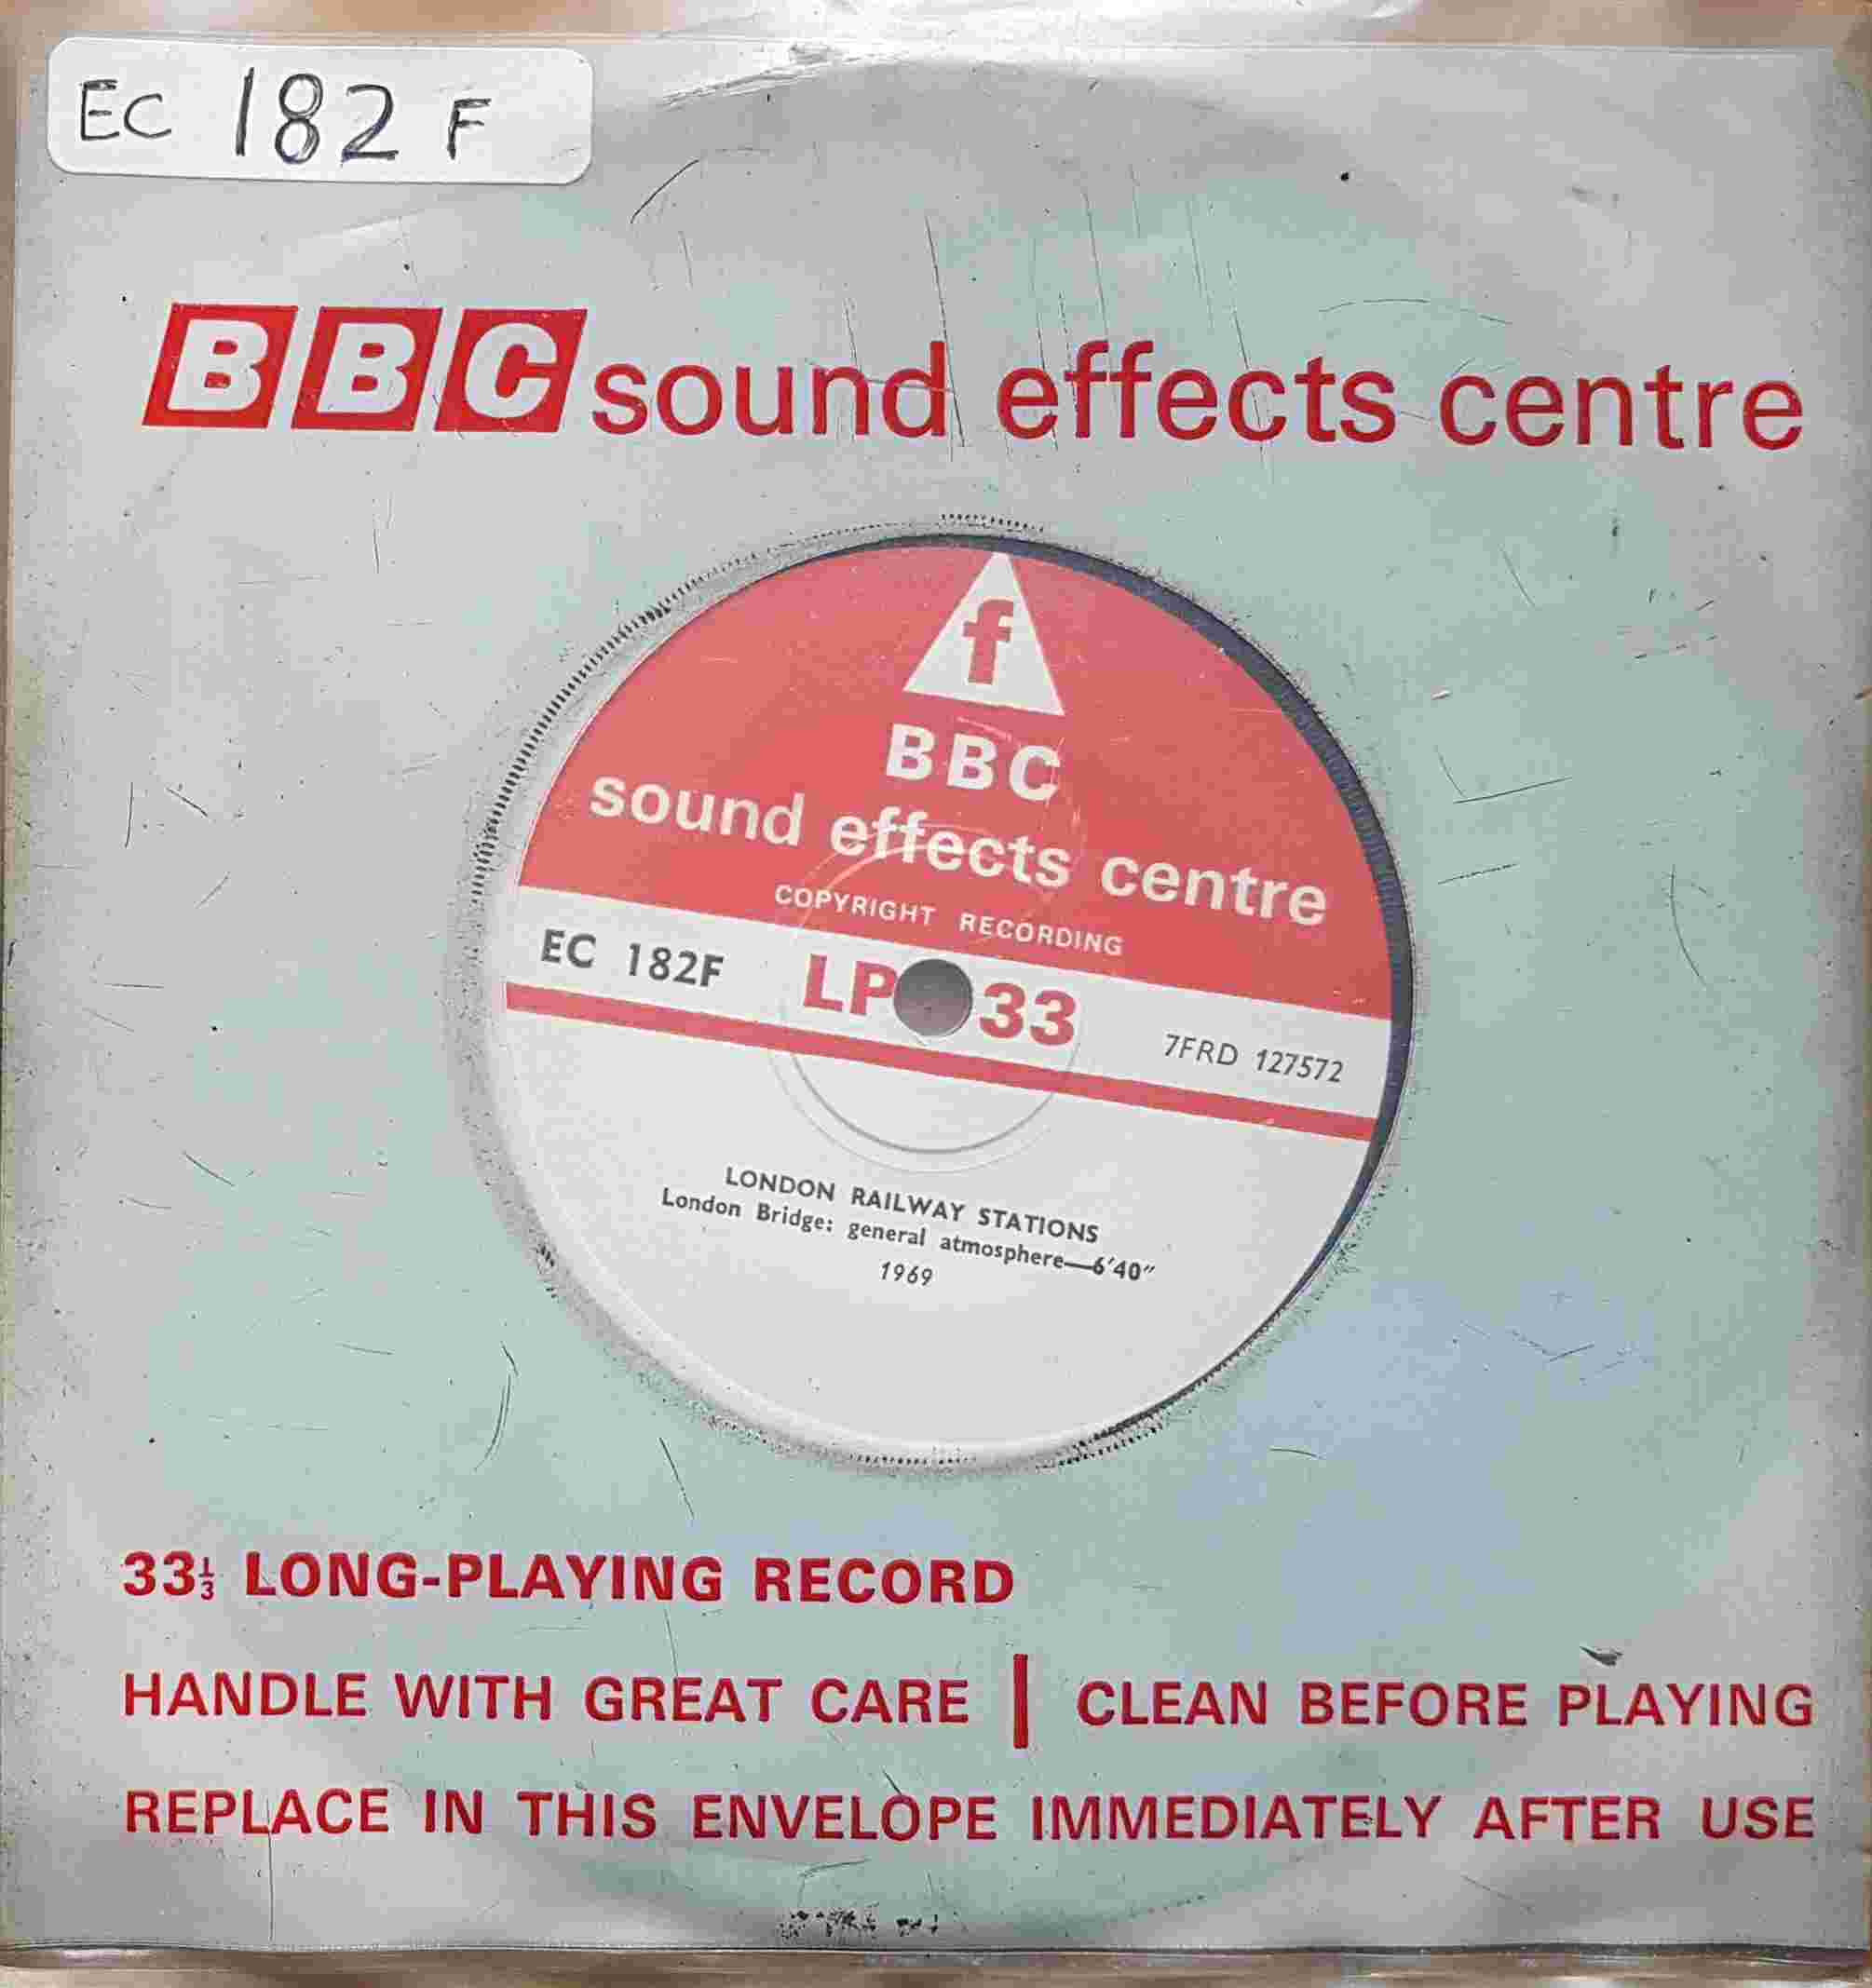 Picture of EC 182F London railway stations by artist Not registered from the BBC singles - Records and Tapes library